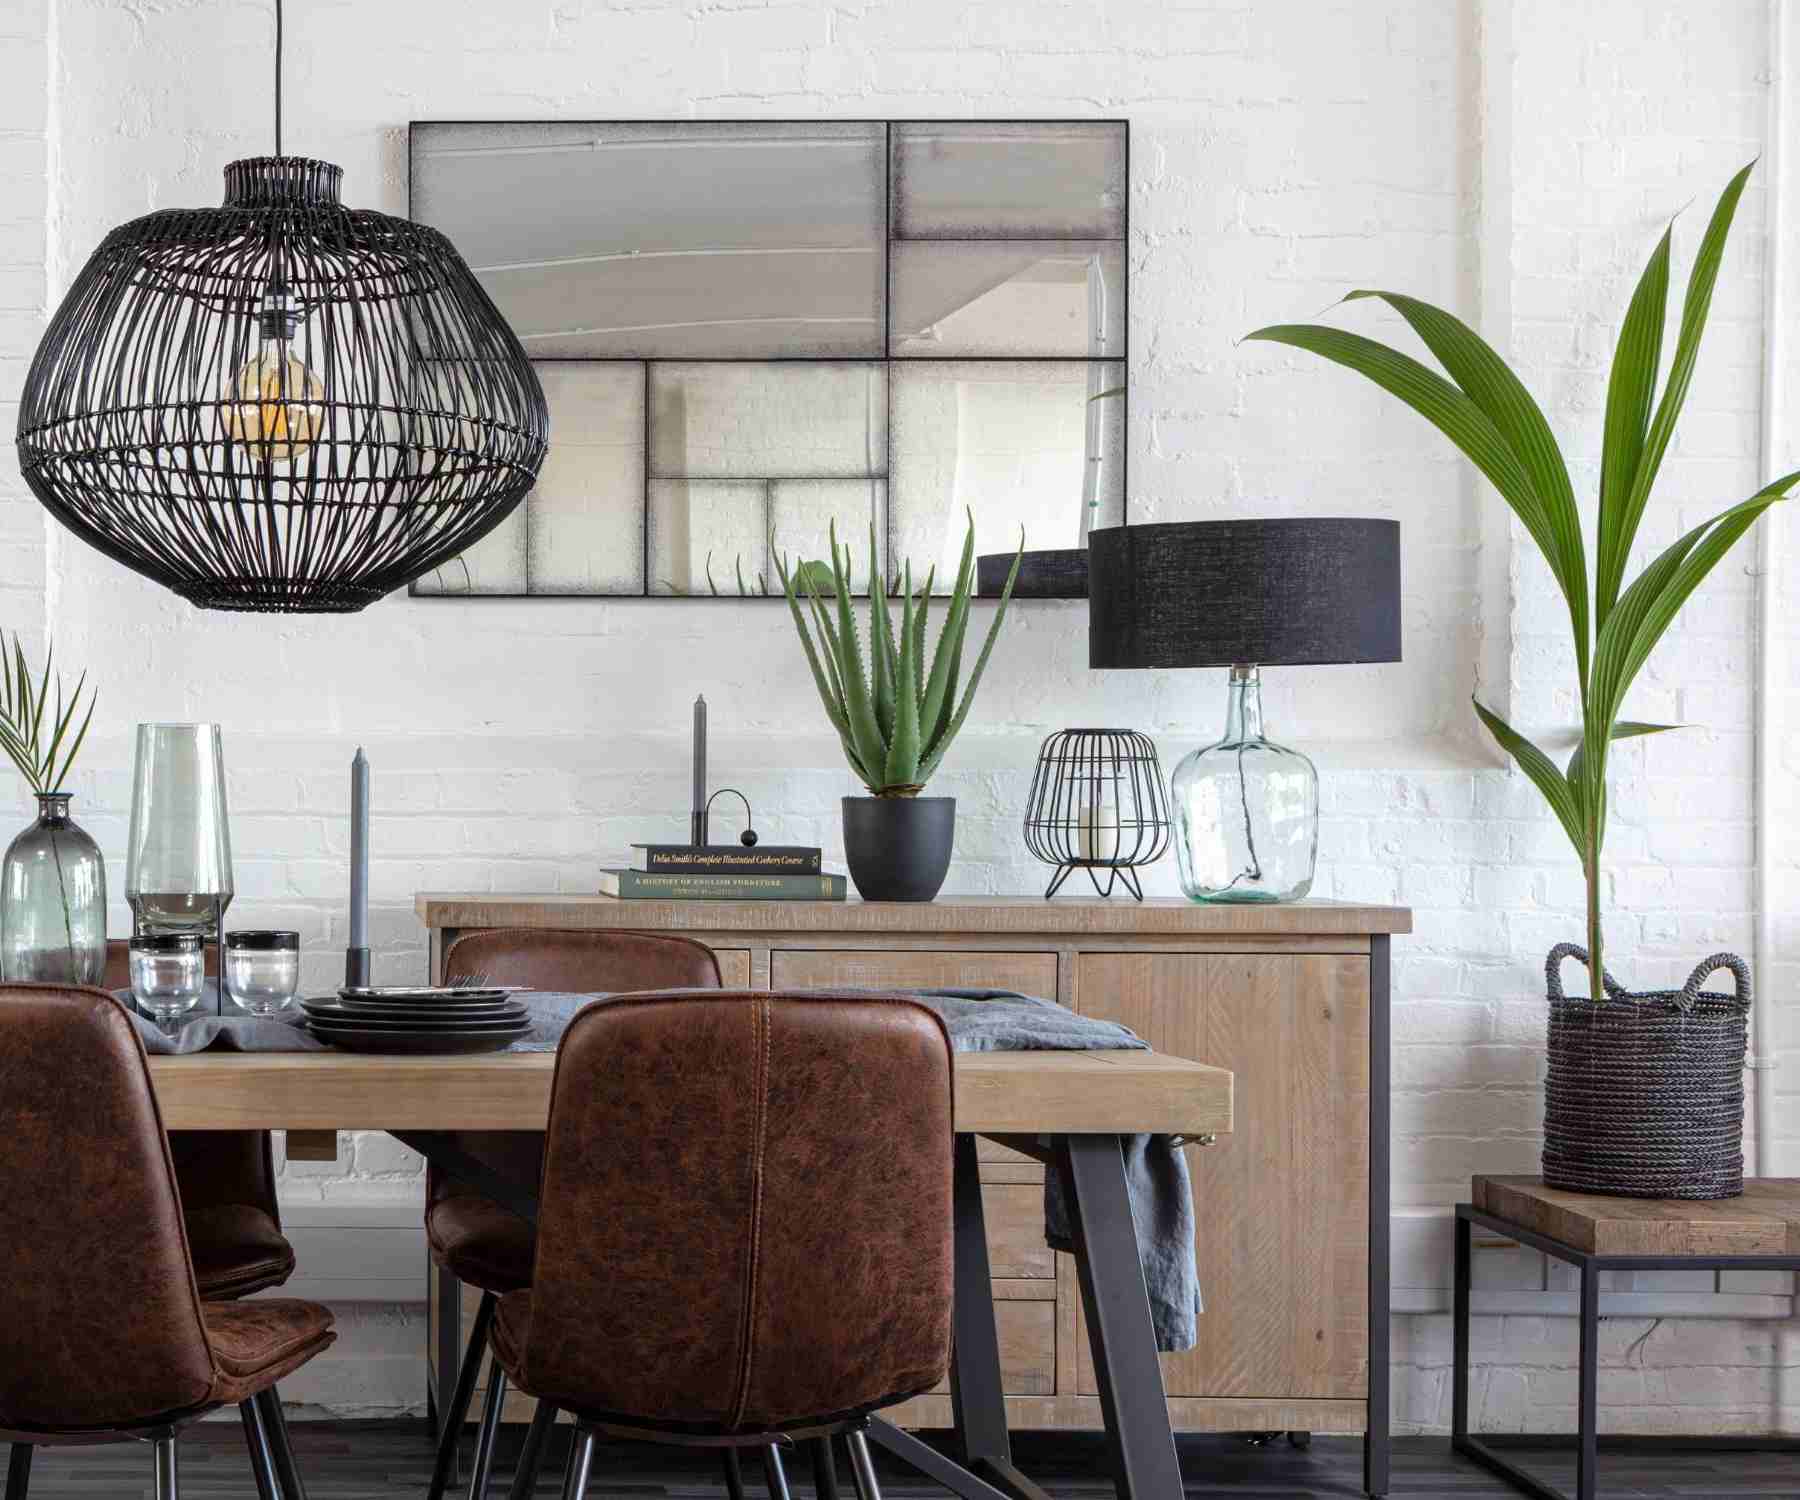 Reclaimed wood dining table with faux leather chairs and black pendant light